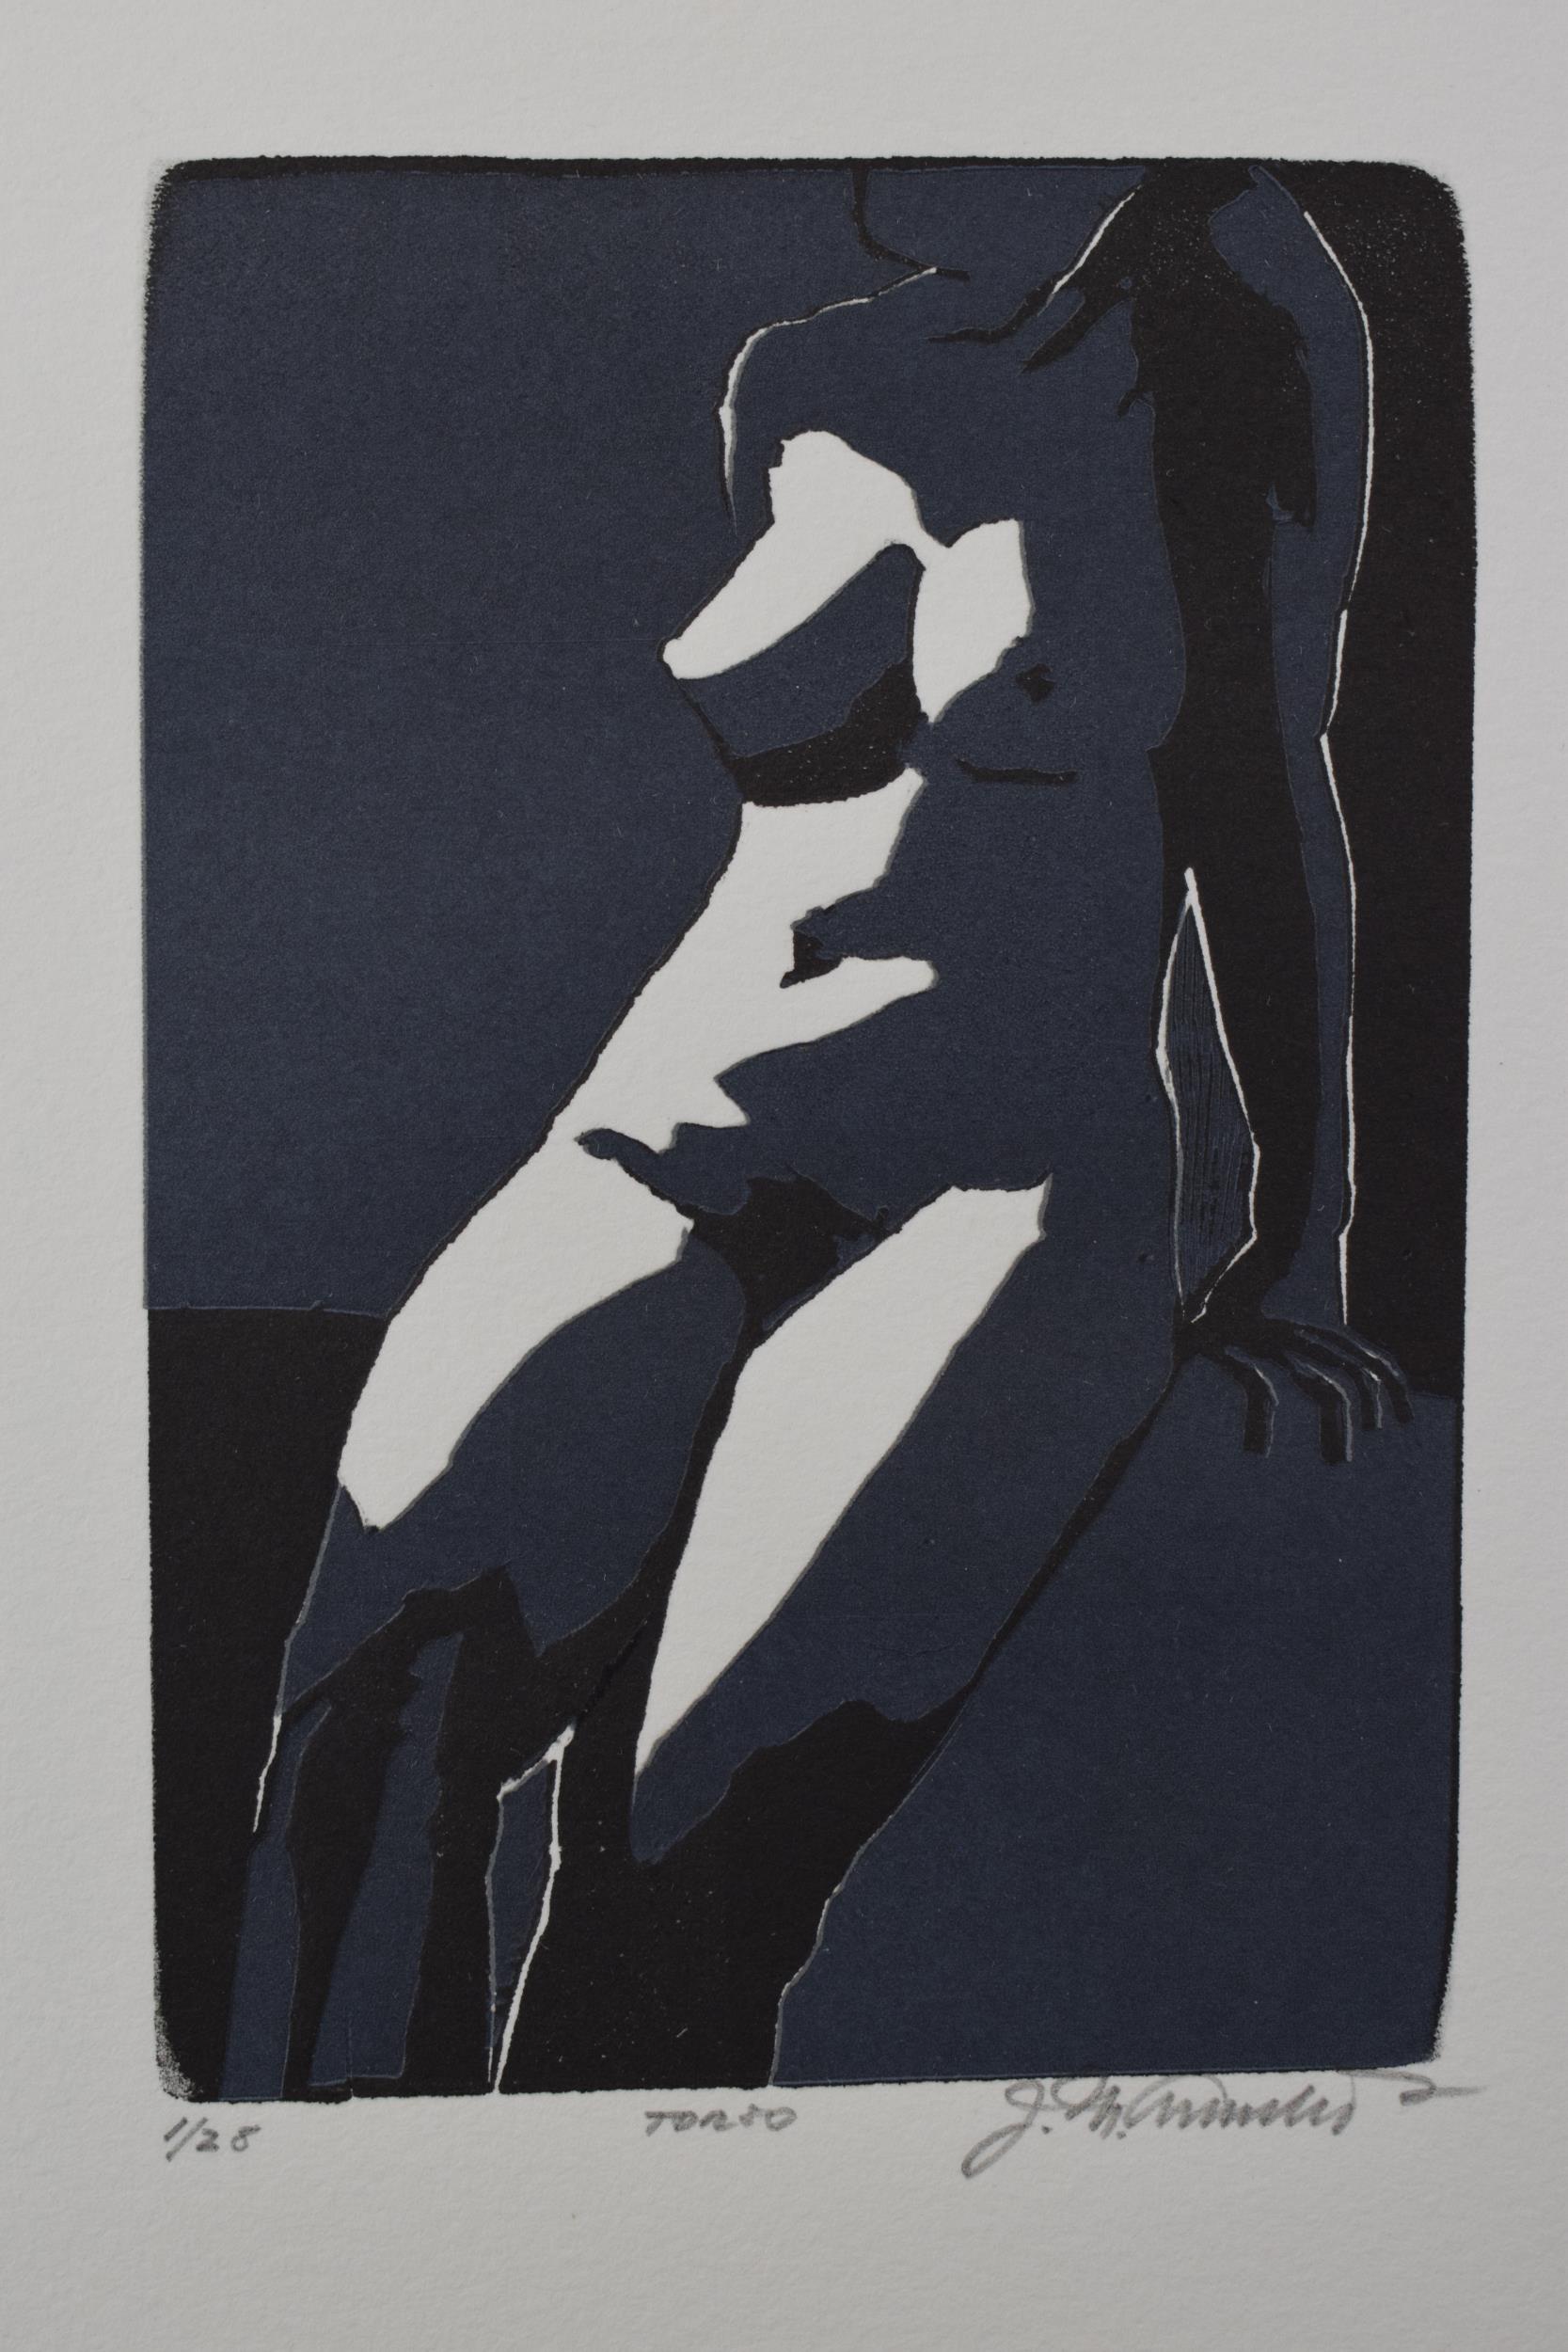 Two aquatint nudes, limited edition prints 1/28 and 1/22 'Torso' and 'K.K' indistinguishable - Image 2 of 3